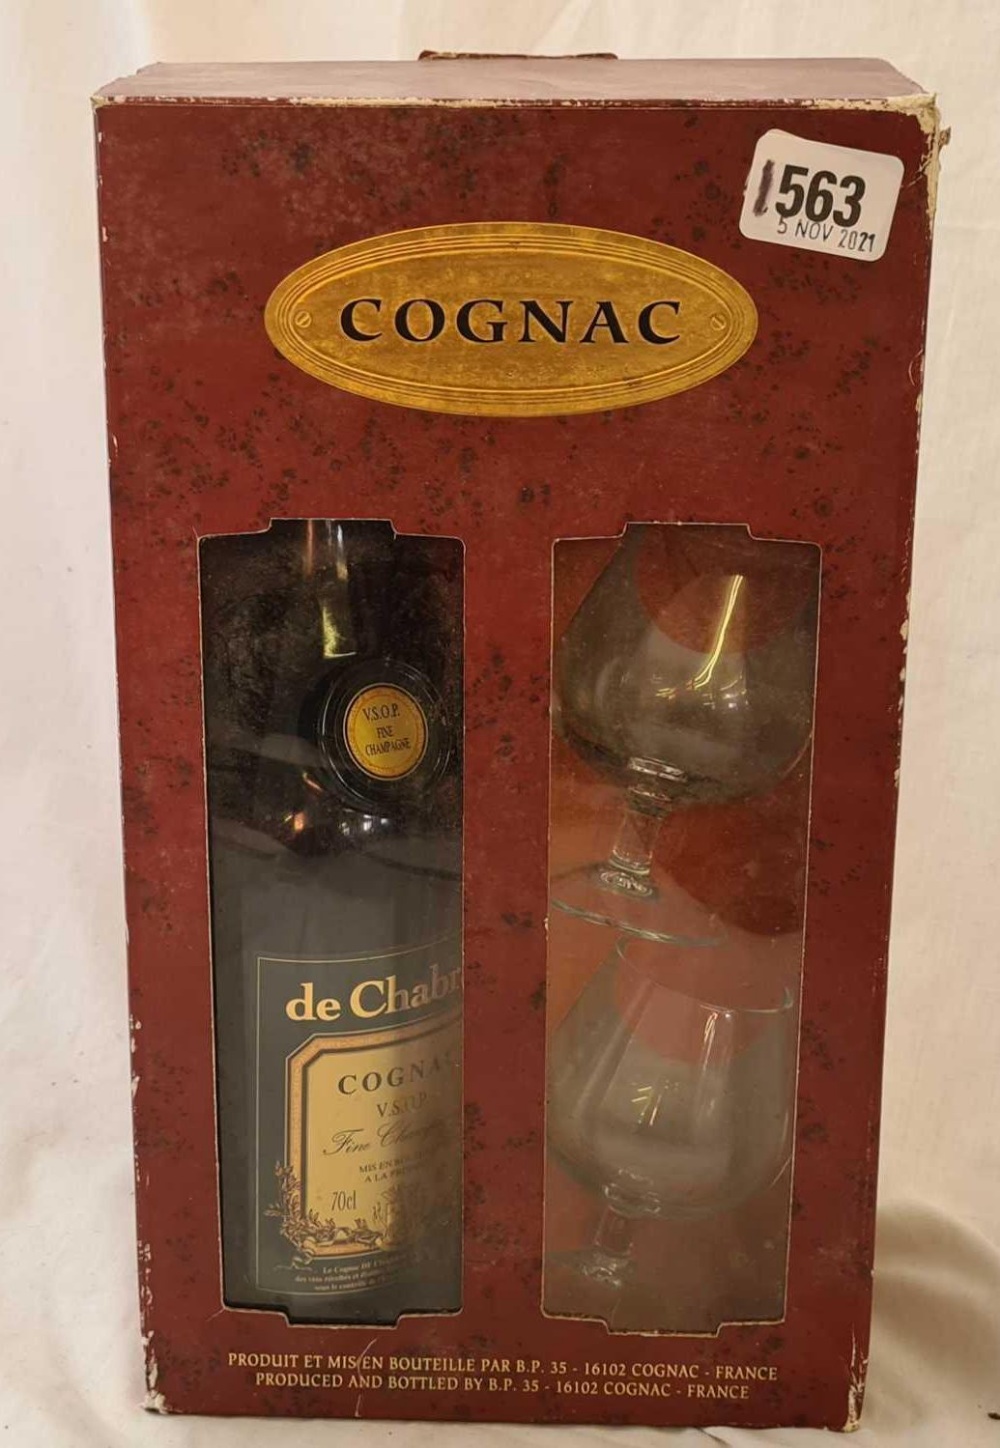 A bottle of Cognac with wine glasses